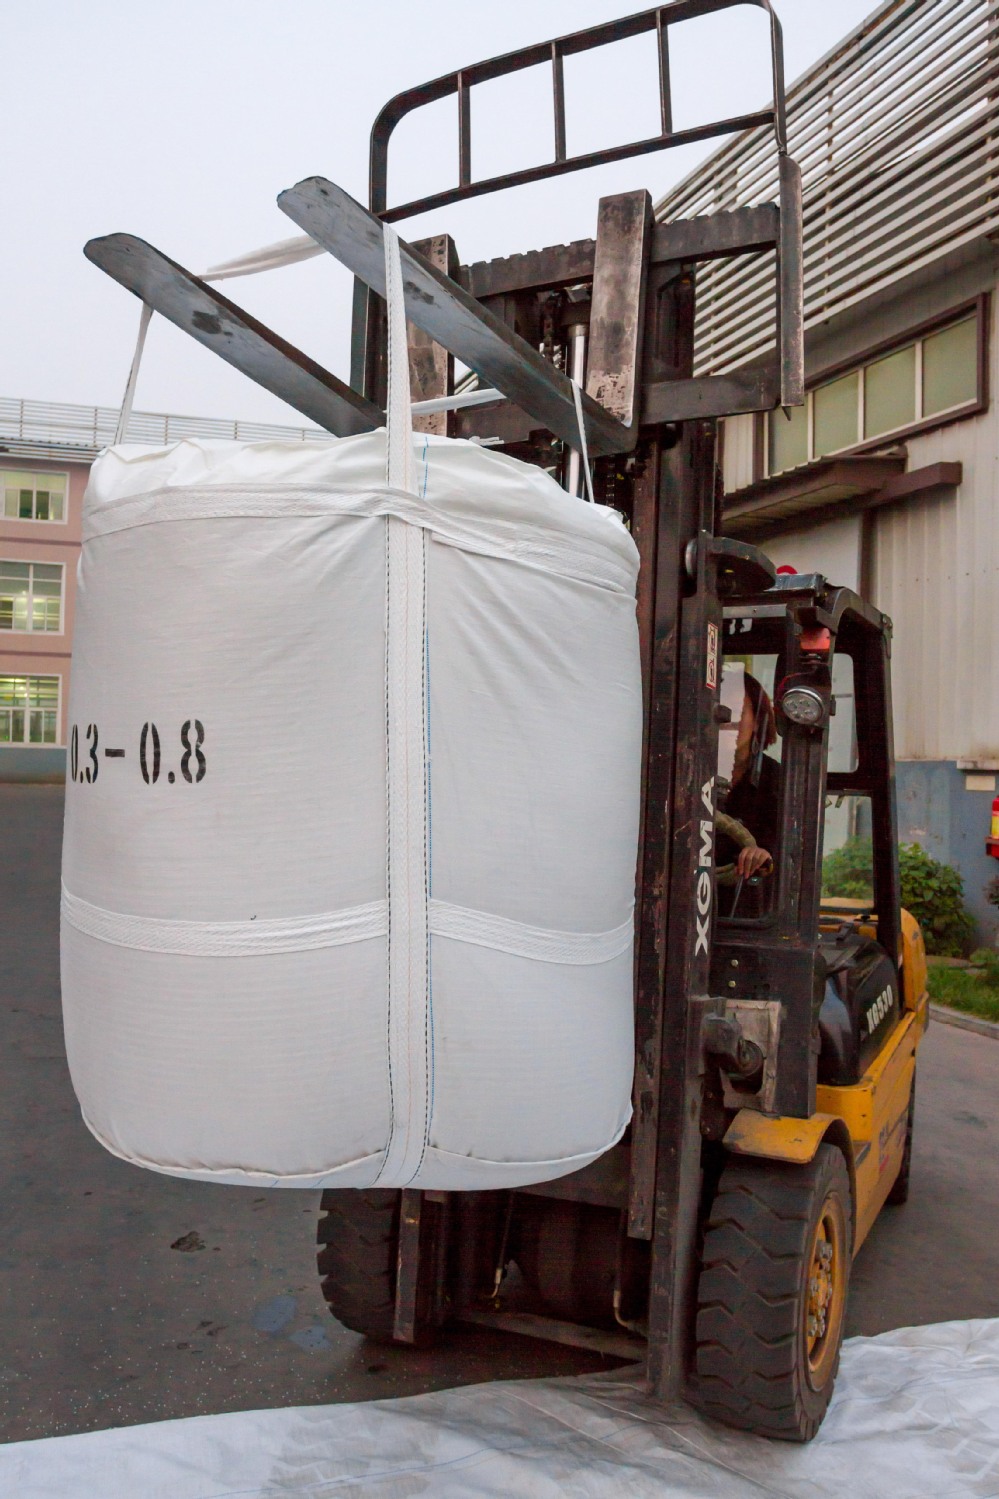 Bags for grain storage